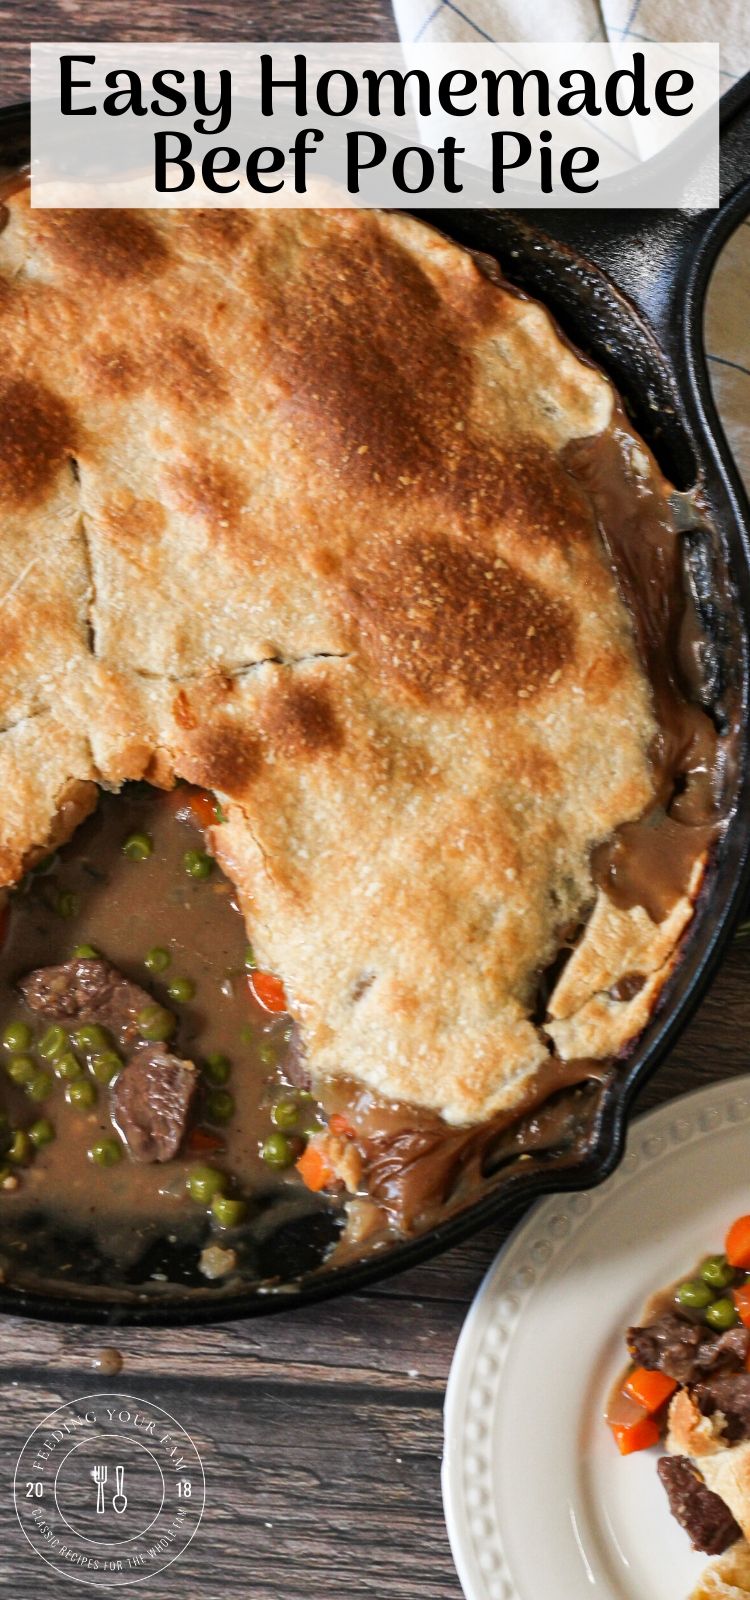 image of a beef pot pie with a slice taken out on a plate